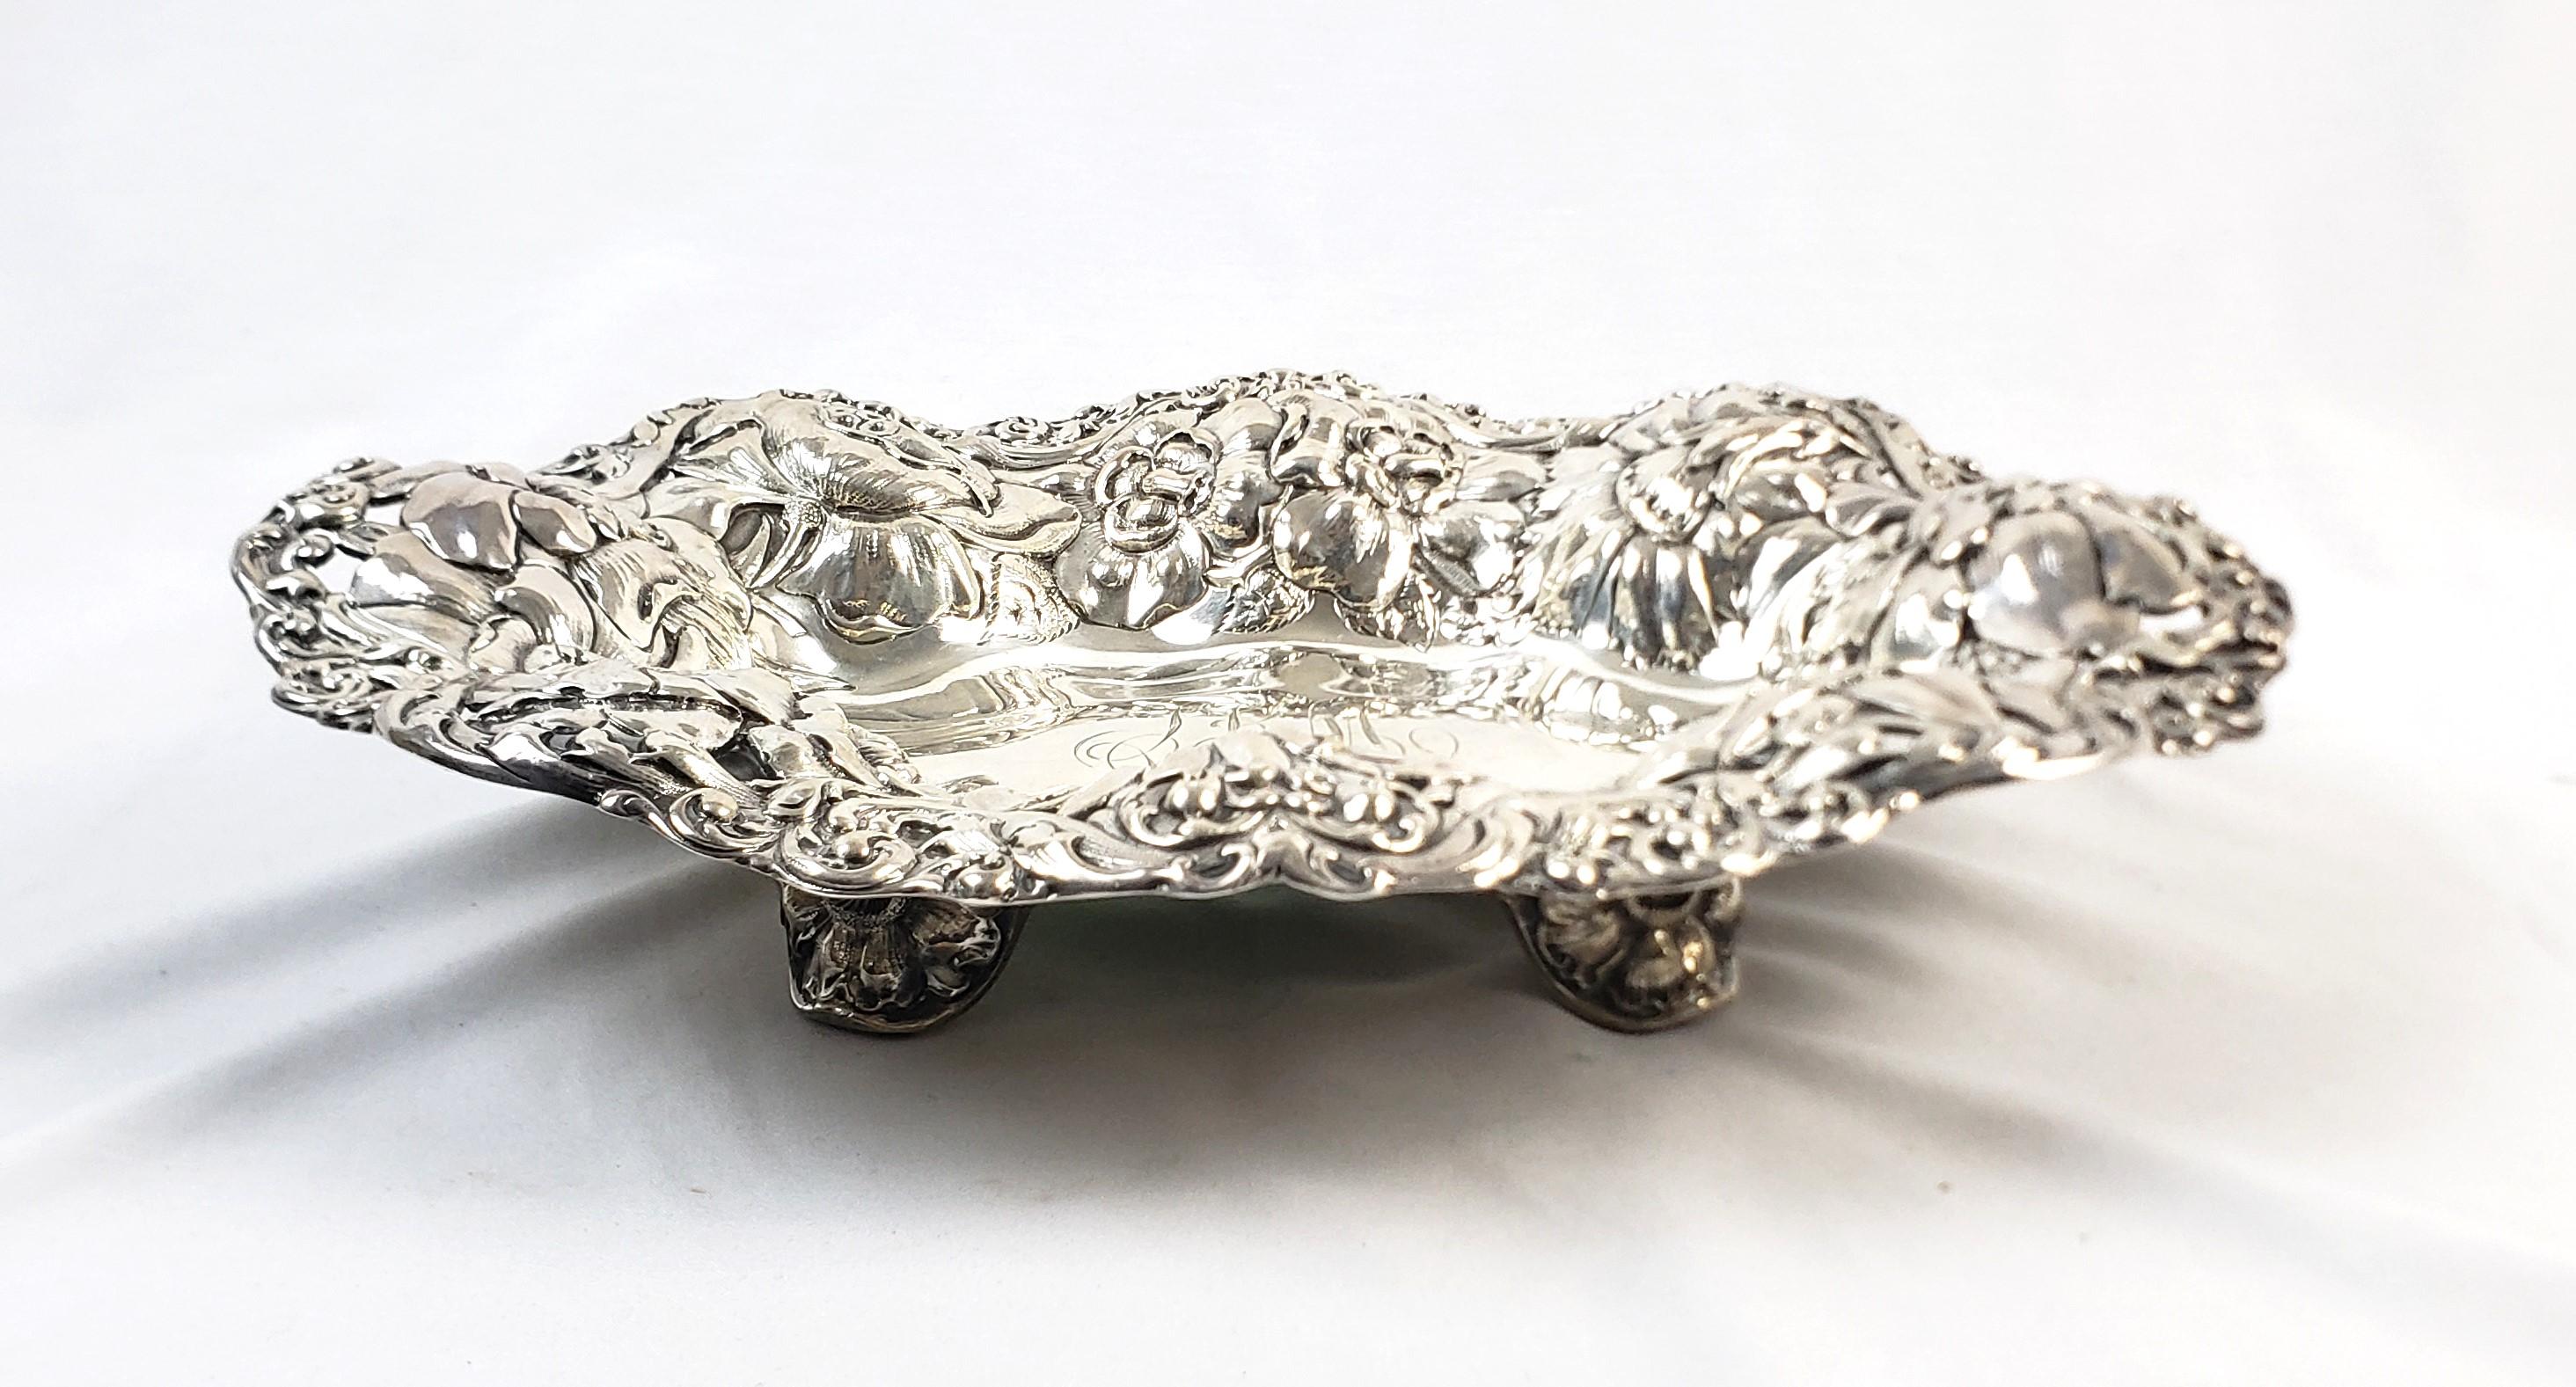 Hand-Crafted Antique Gorham Sterling Silver Bowl with Ornate Chased Floral Decoration For Sale